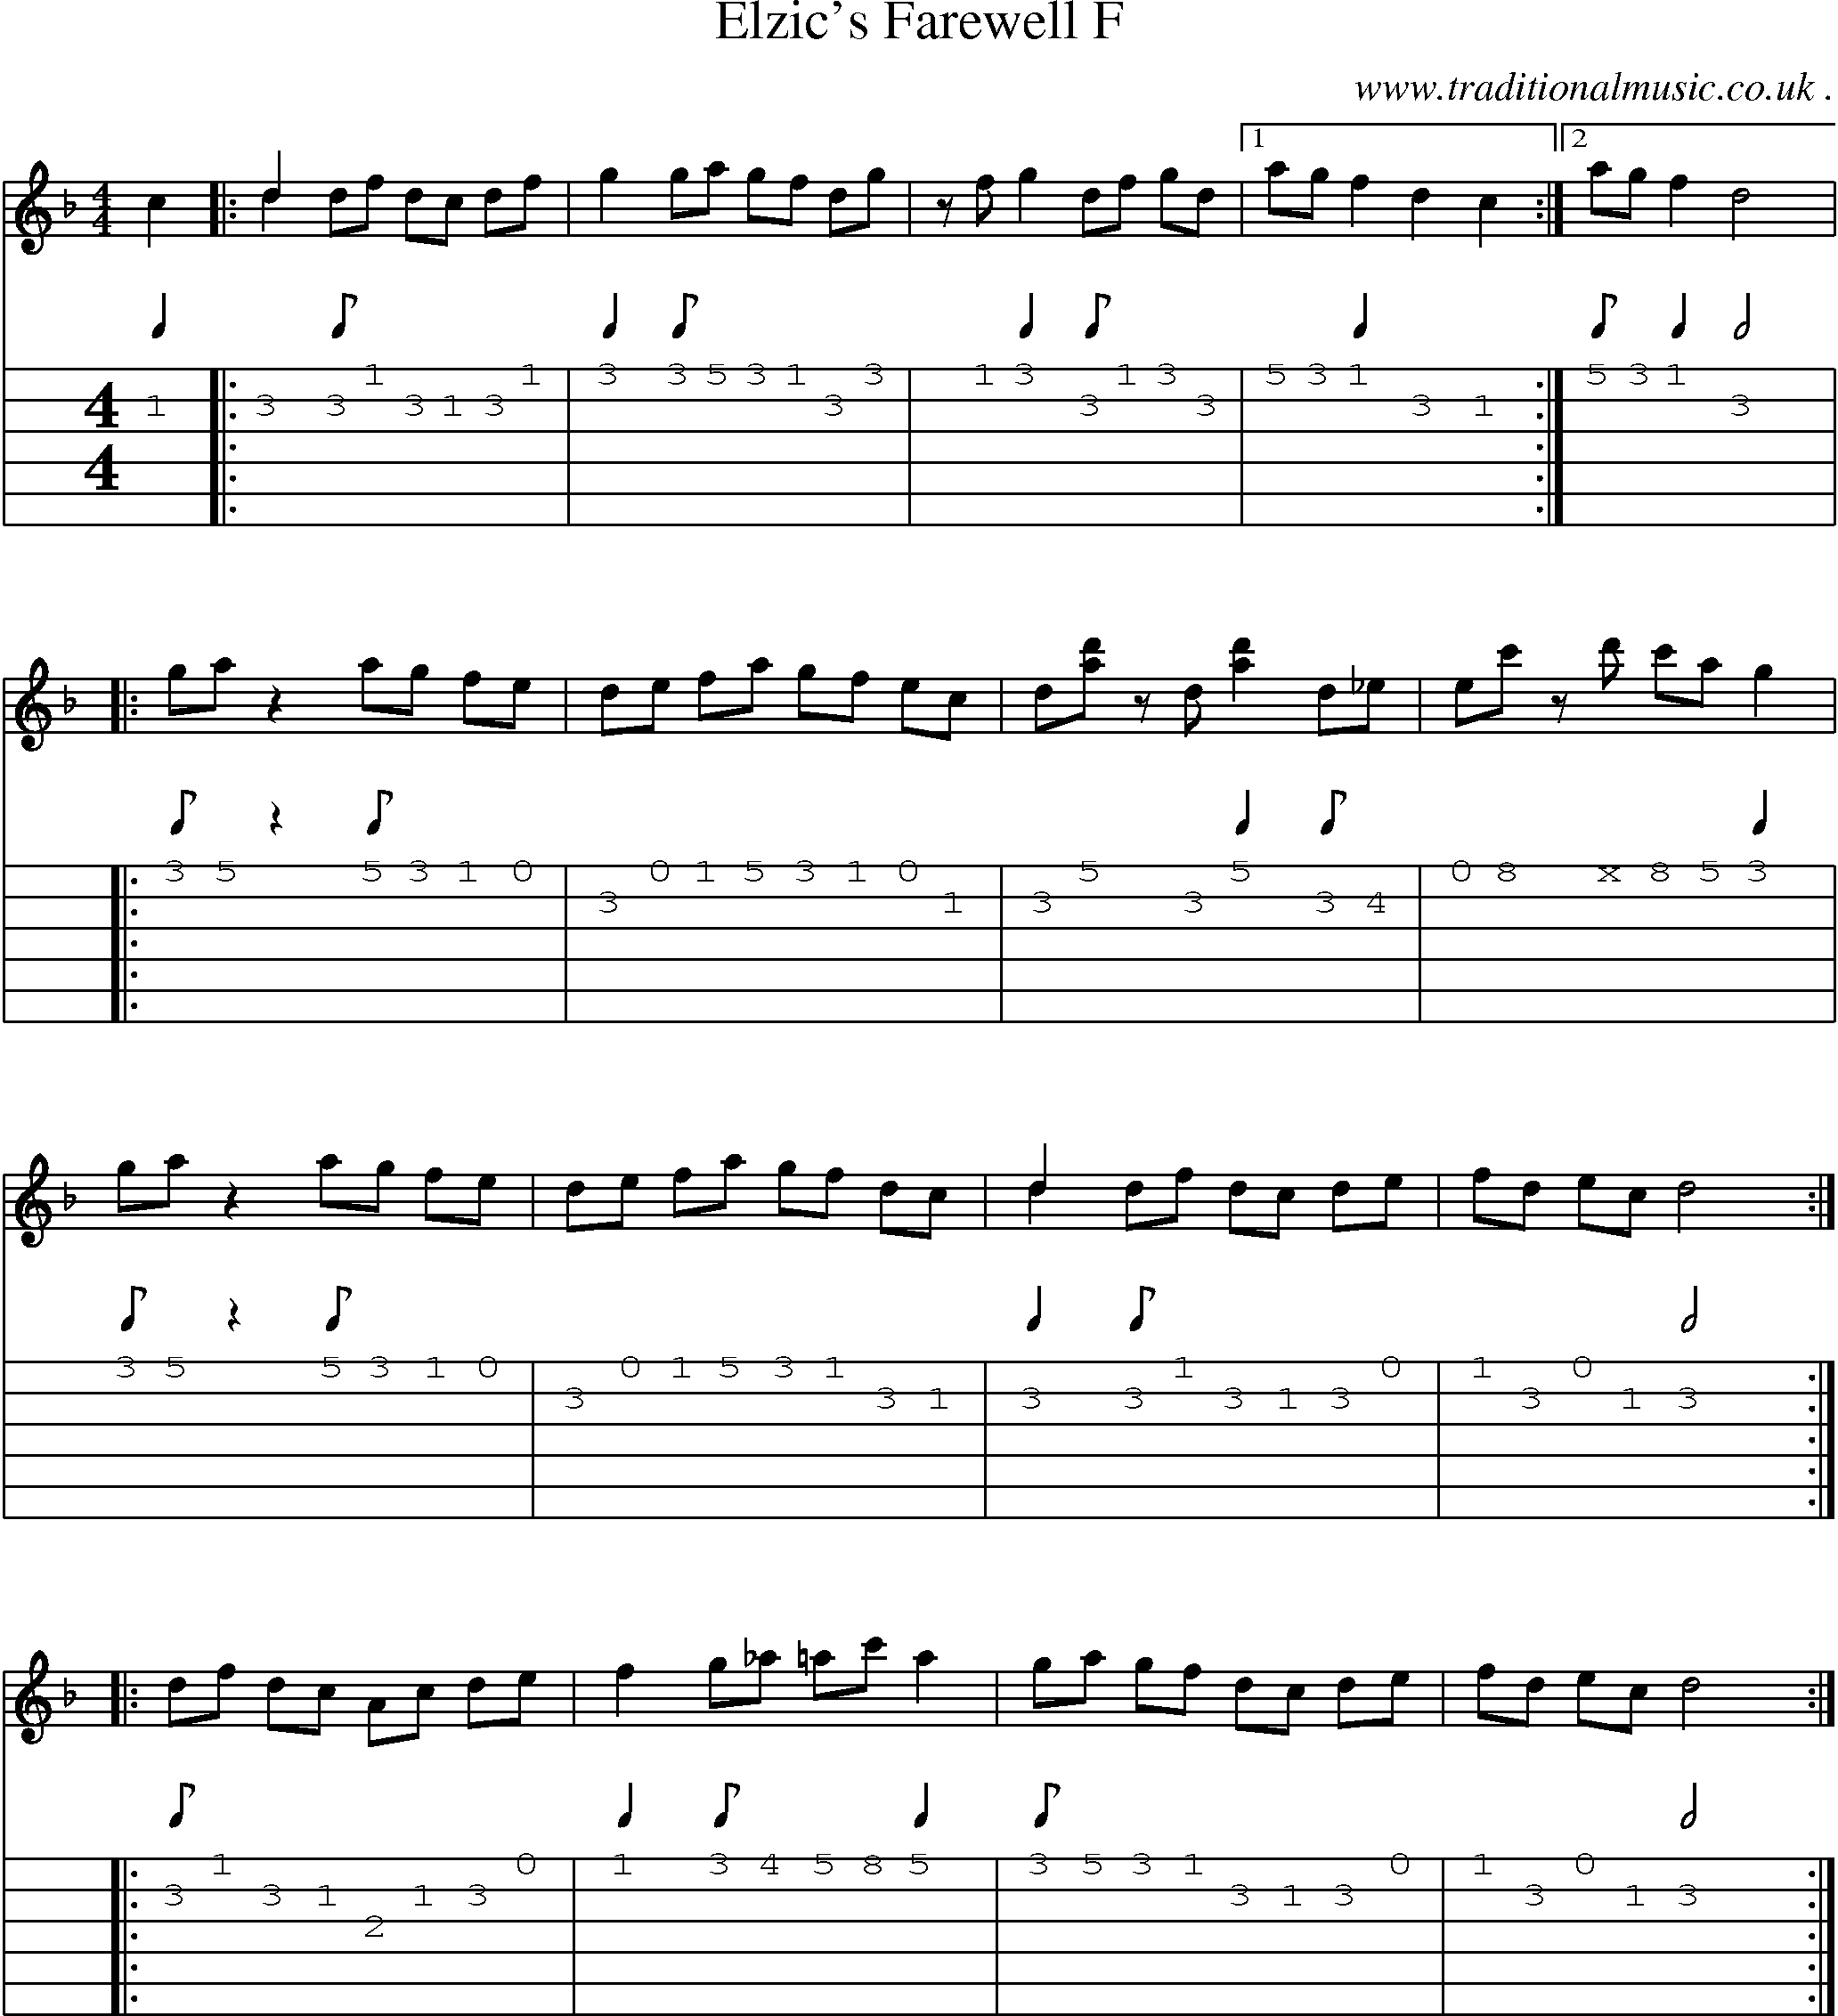 Music Score and Guitar Tabs for Elzics Farewell F